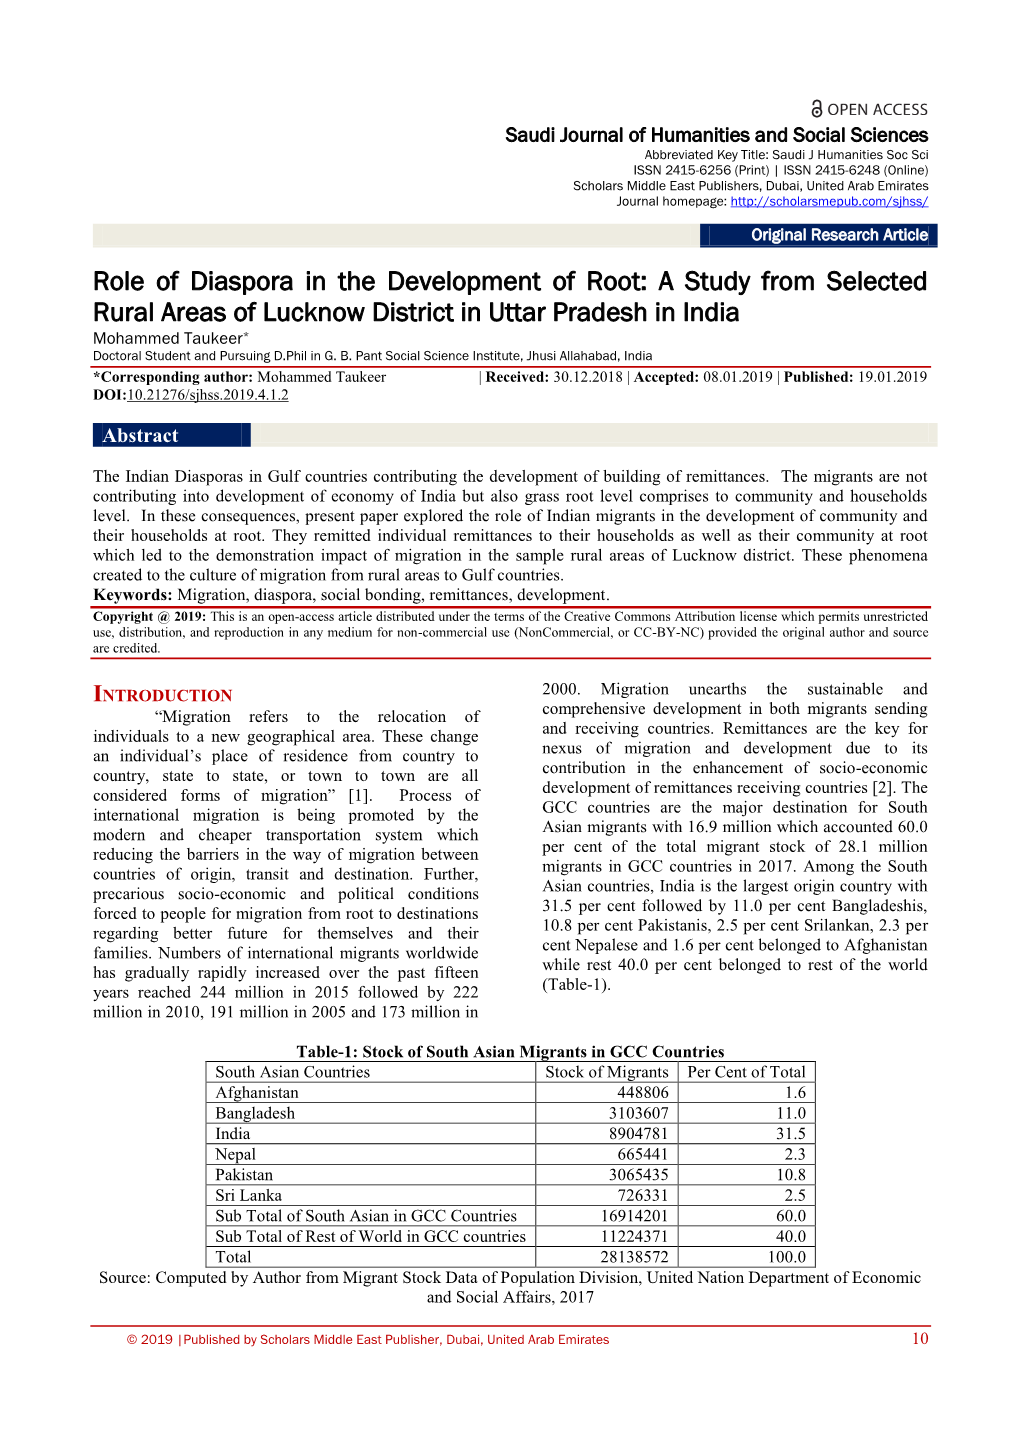 Role of Diaspora in the Development of Root: a Study from Selected